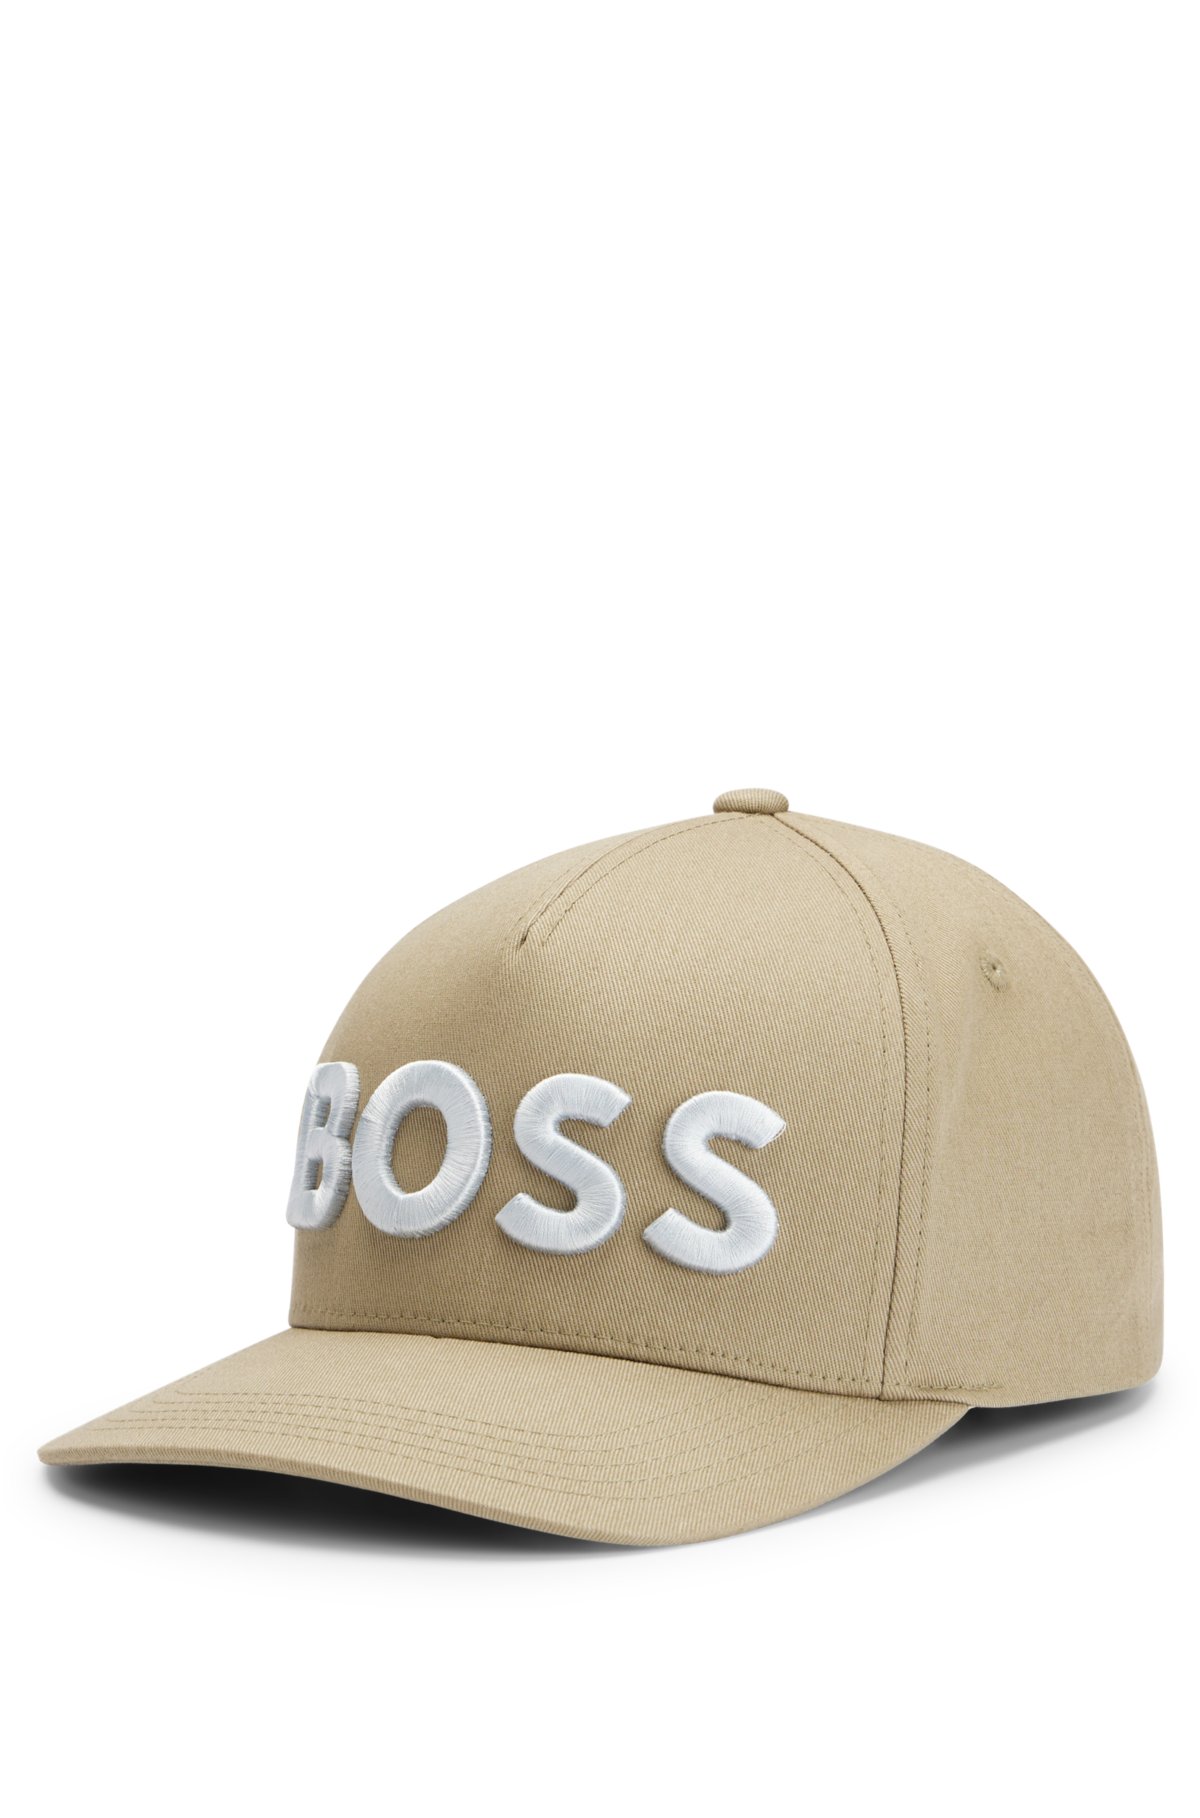 BOSS - logo strap cap Cotton-twill with adjustable embroidered and